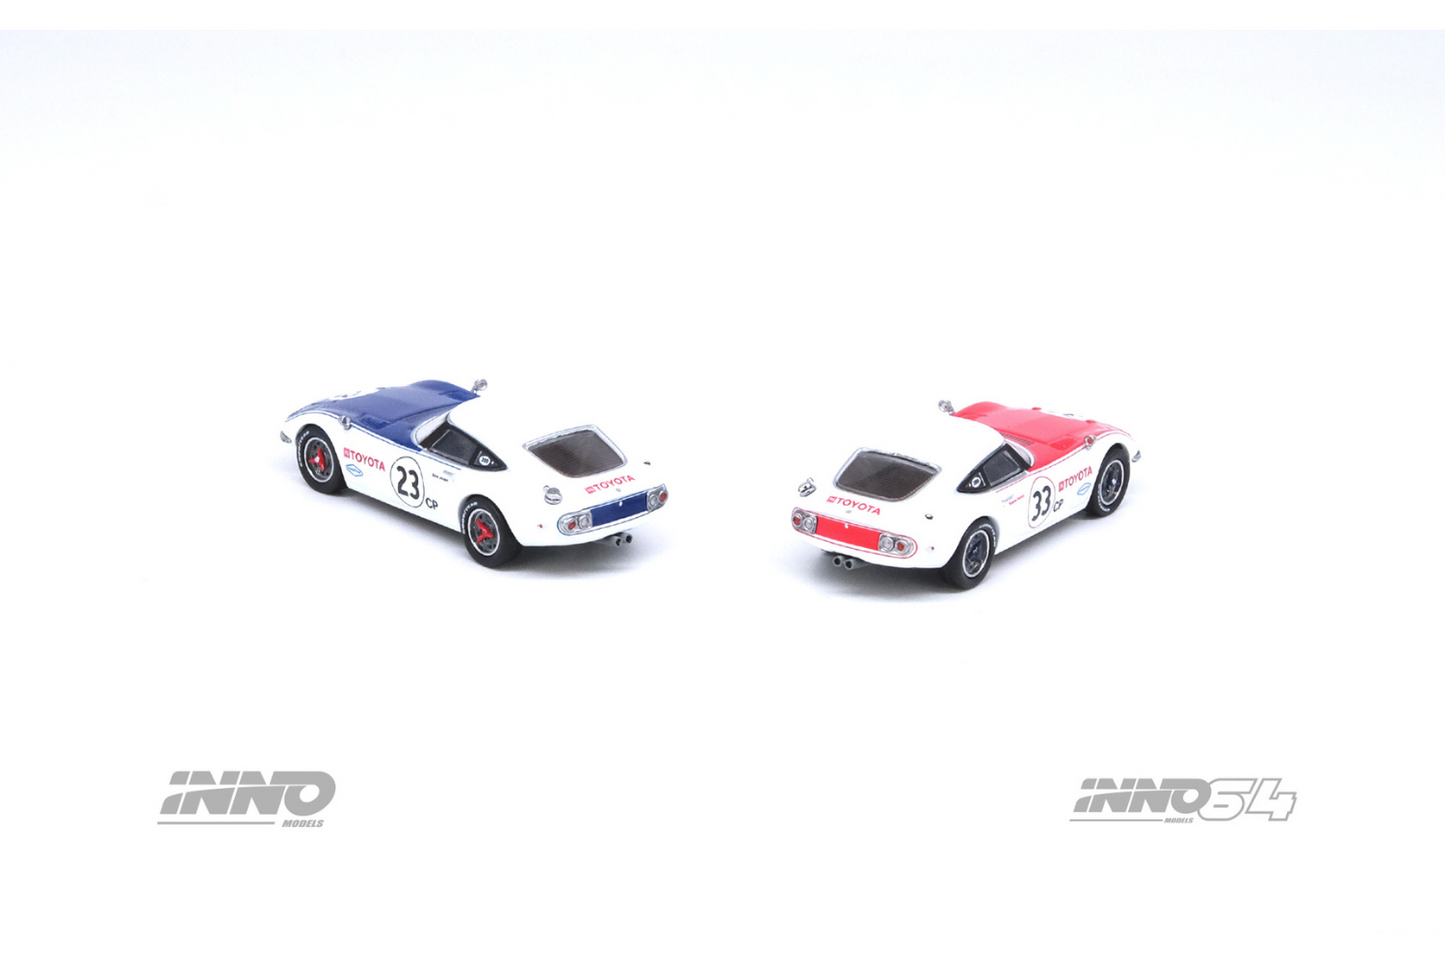 Inno64 Toyota 2000GT #23 & #33 SCCA 1968 Box Set Collection